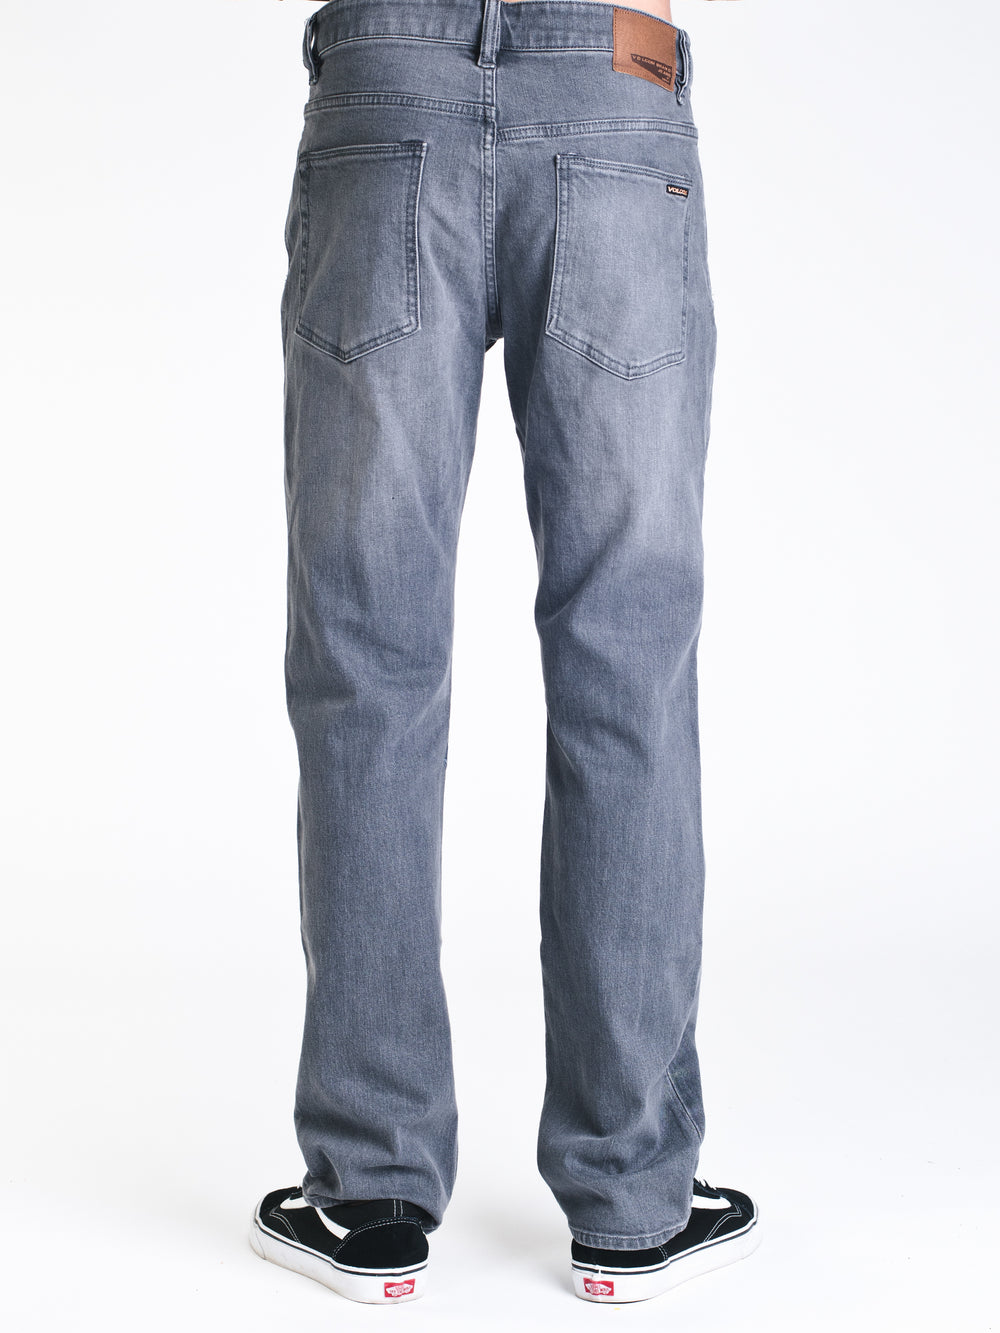 MENS SOLVER JEAN 16' - GREY - CLEARANCE